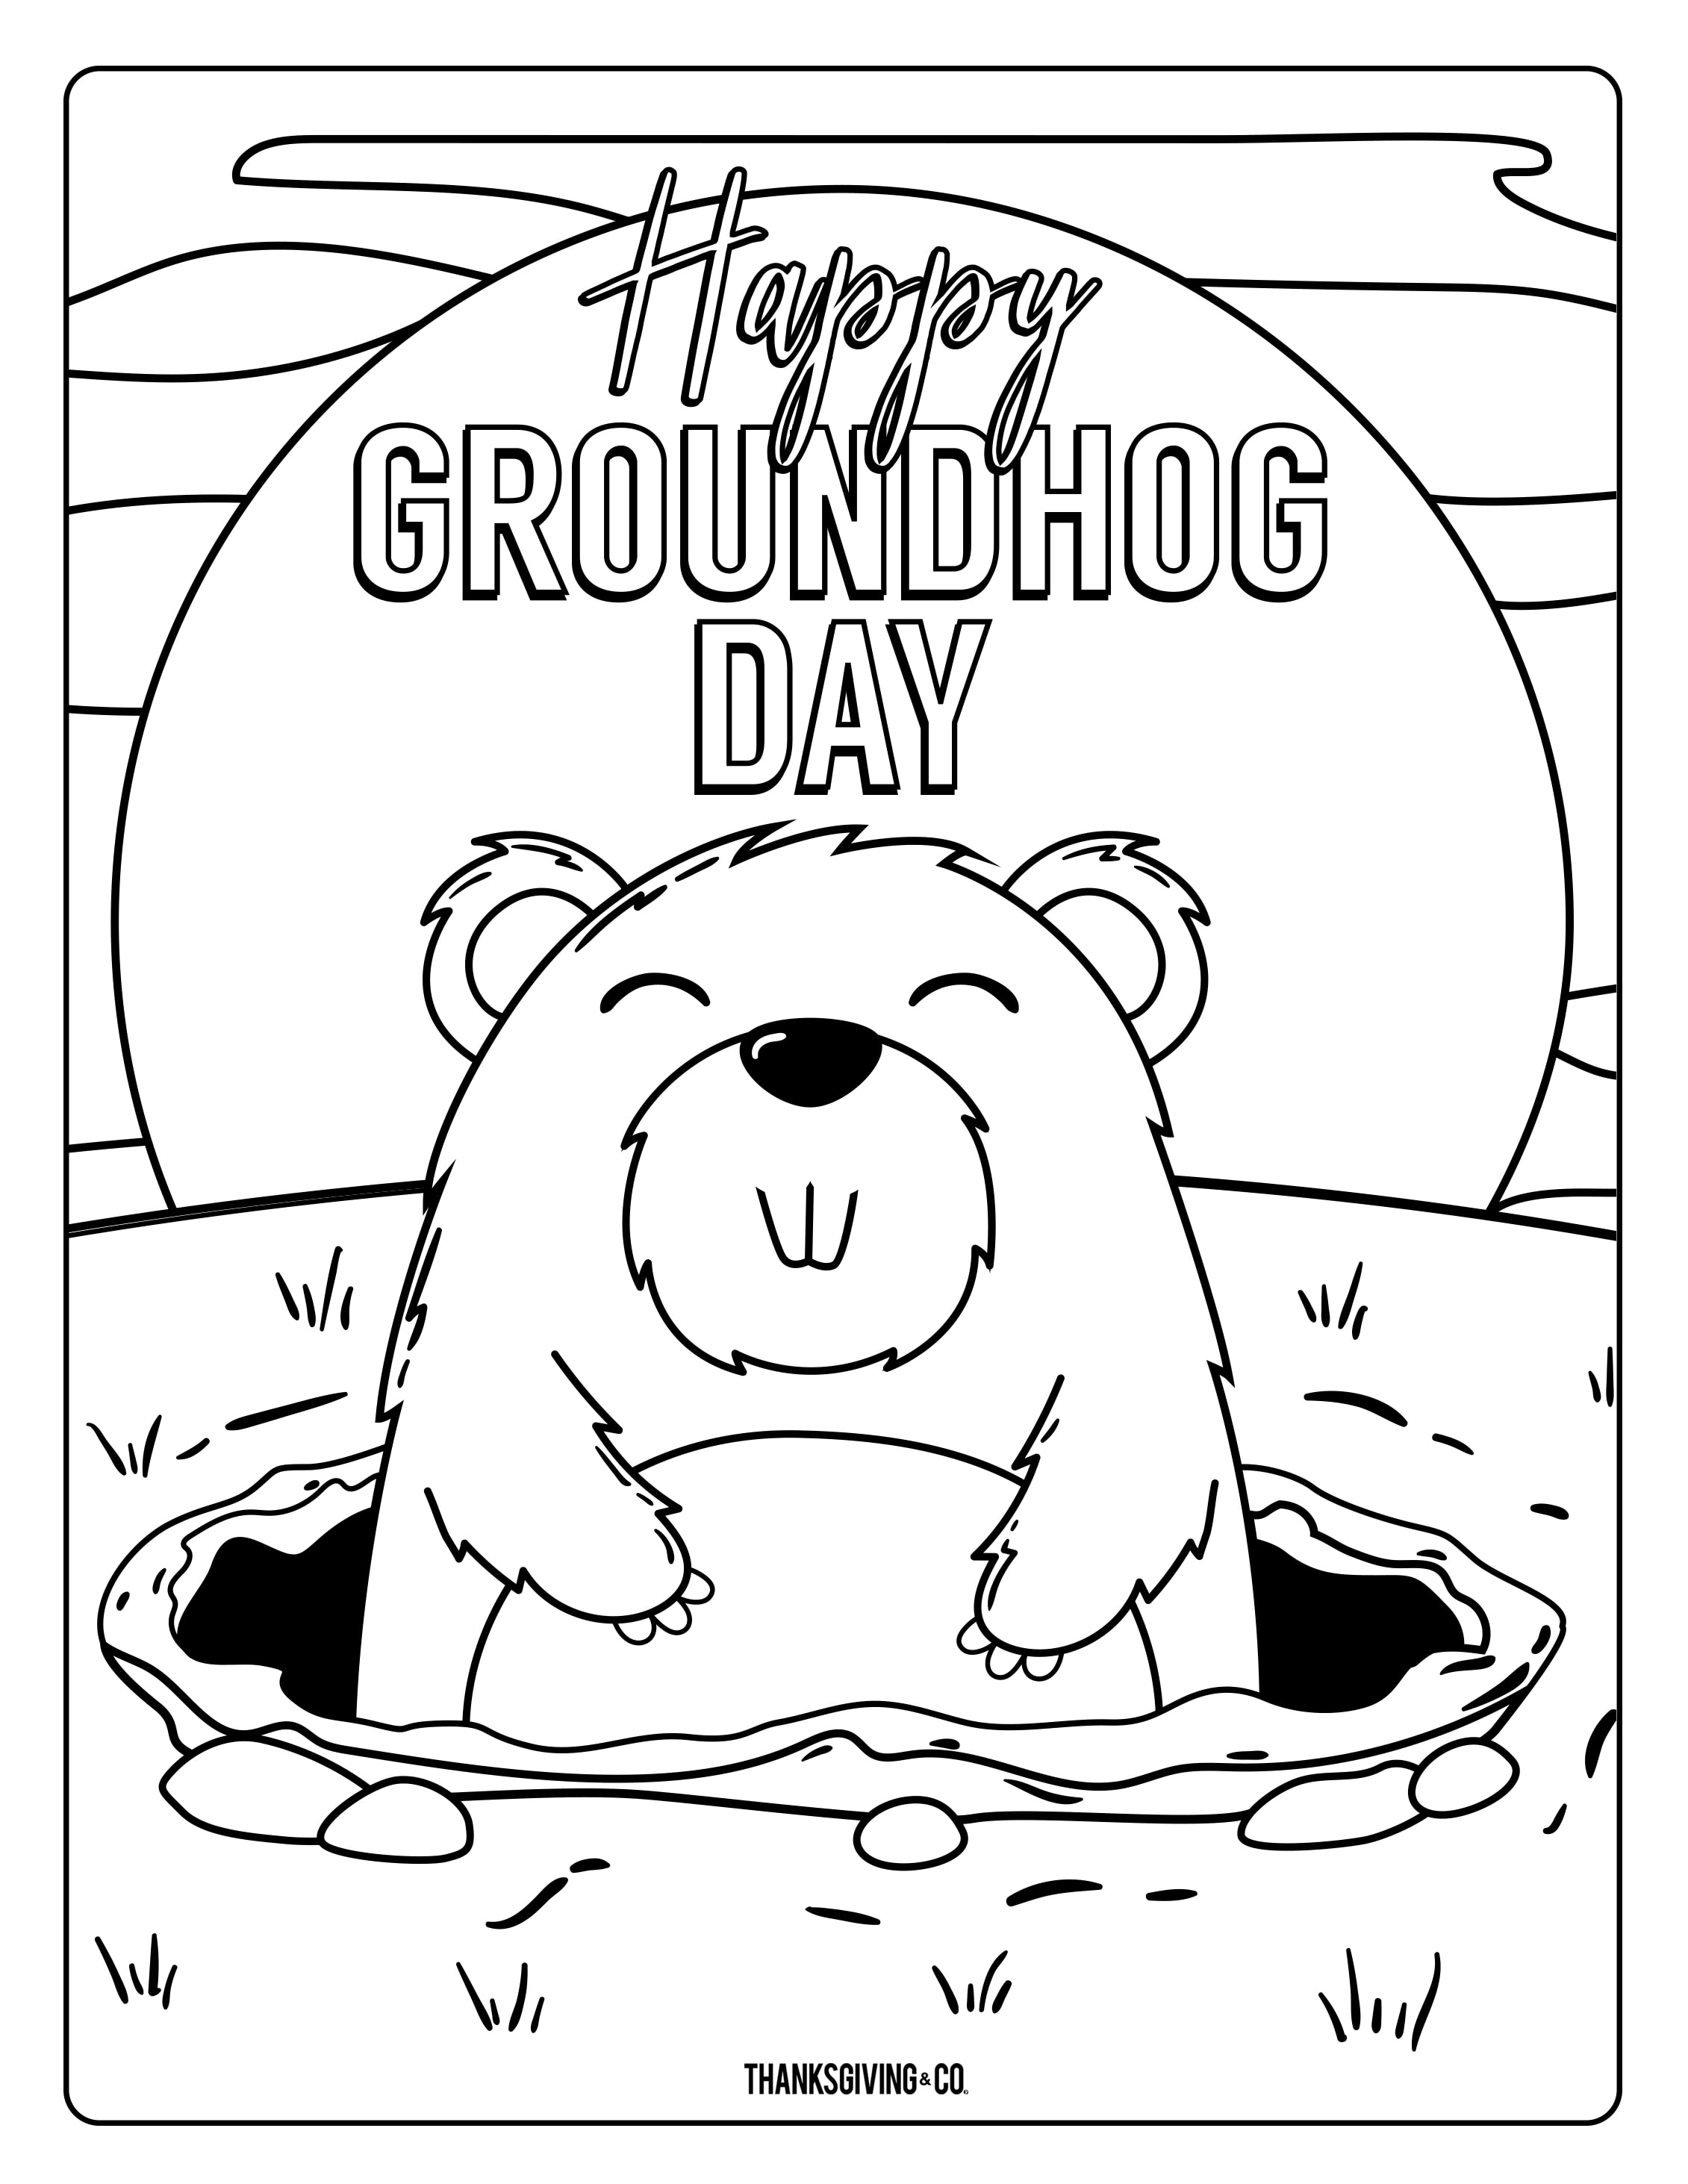 groundhog-day-coloring-pages-2